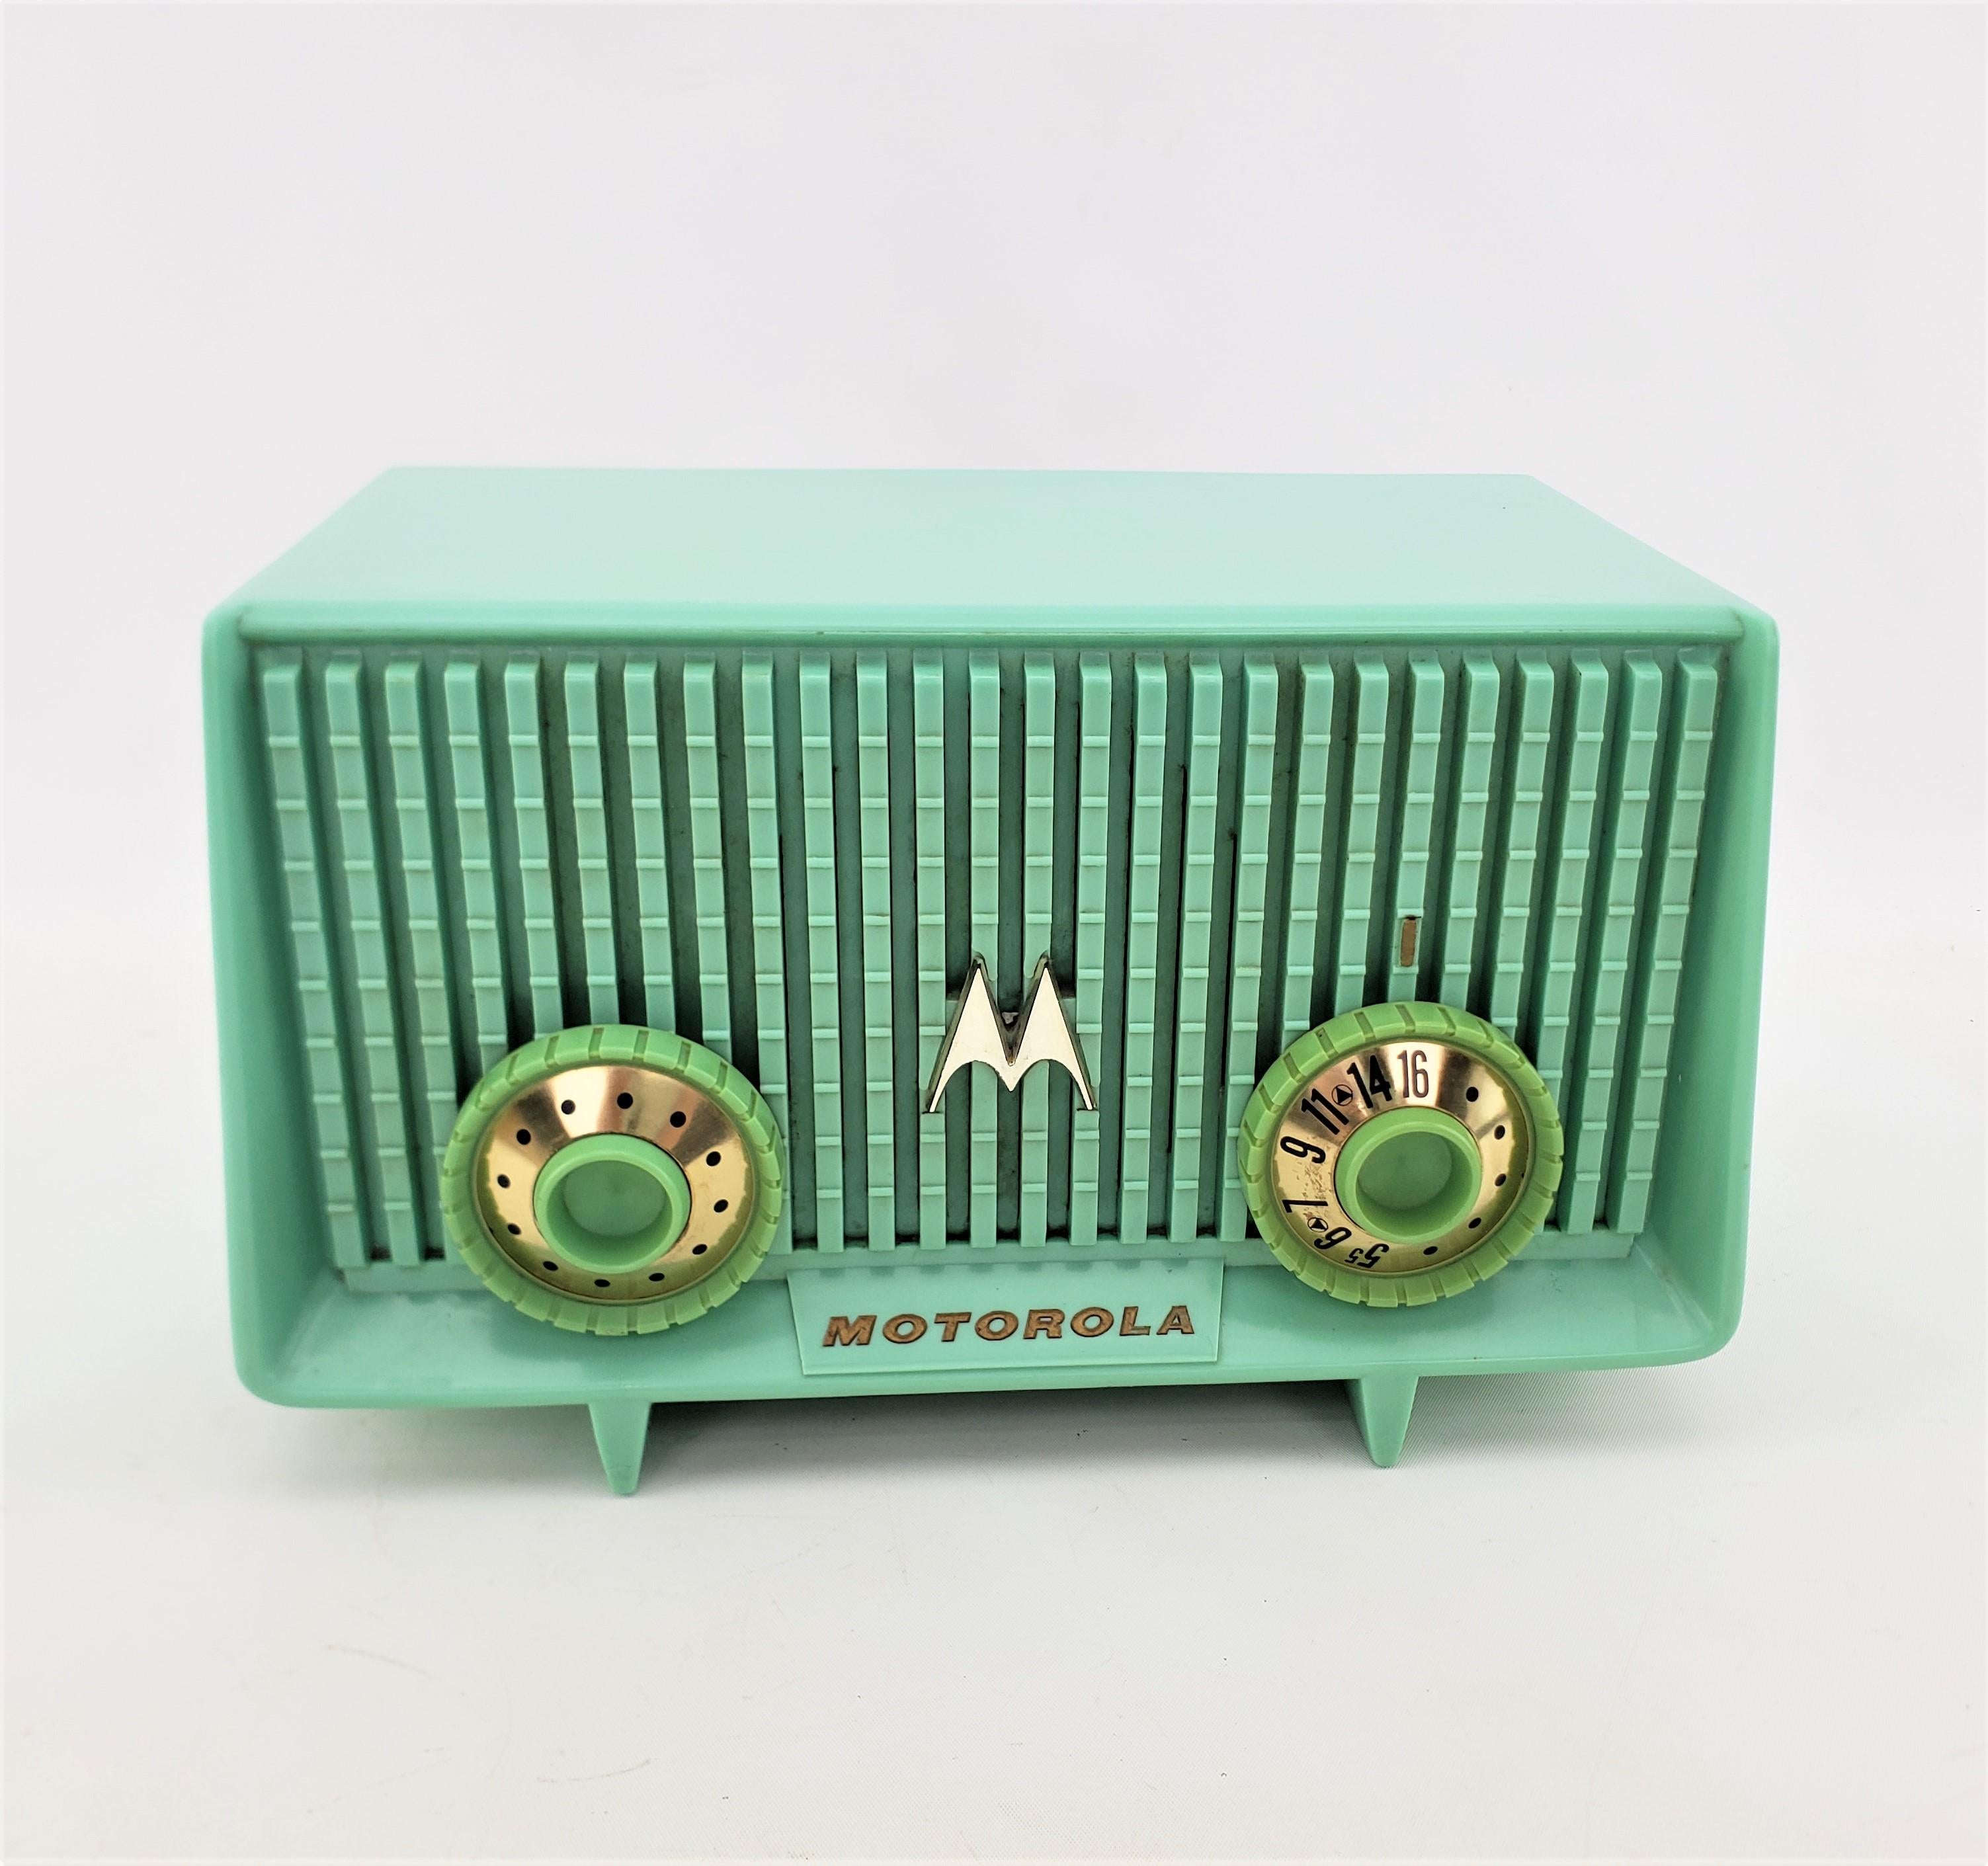 This vintage table radio was made by the Motorola company in a Canadian division, in approximately 1960 in the period Mid-Century Modern style. The case of the radio is a molded turquoise plastic with molded jadeite colored knobs with gold accents.